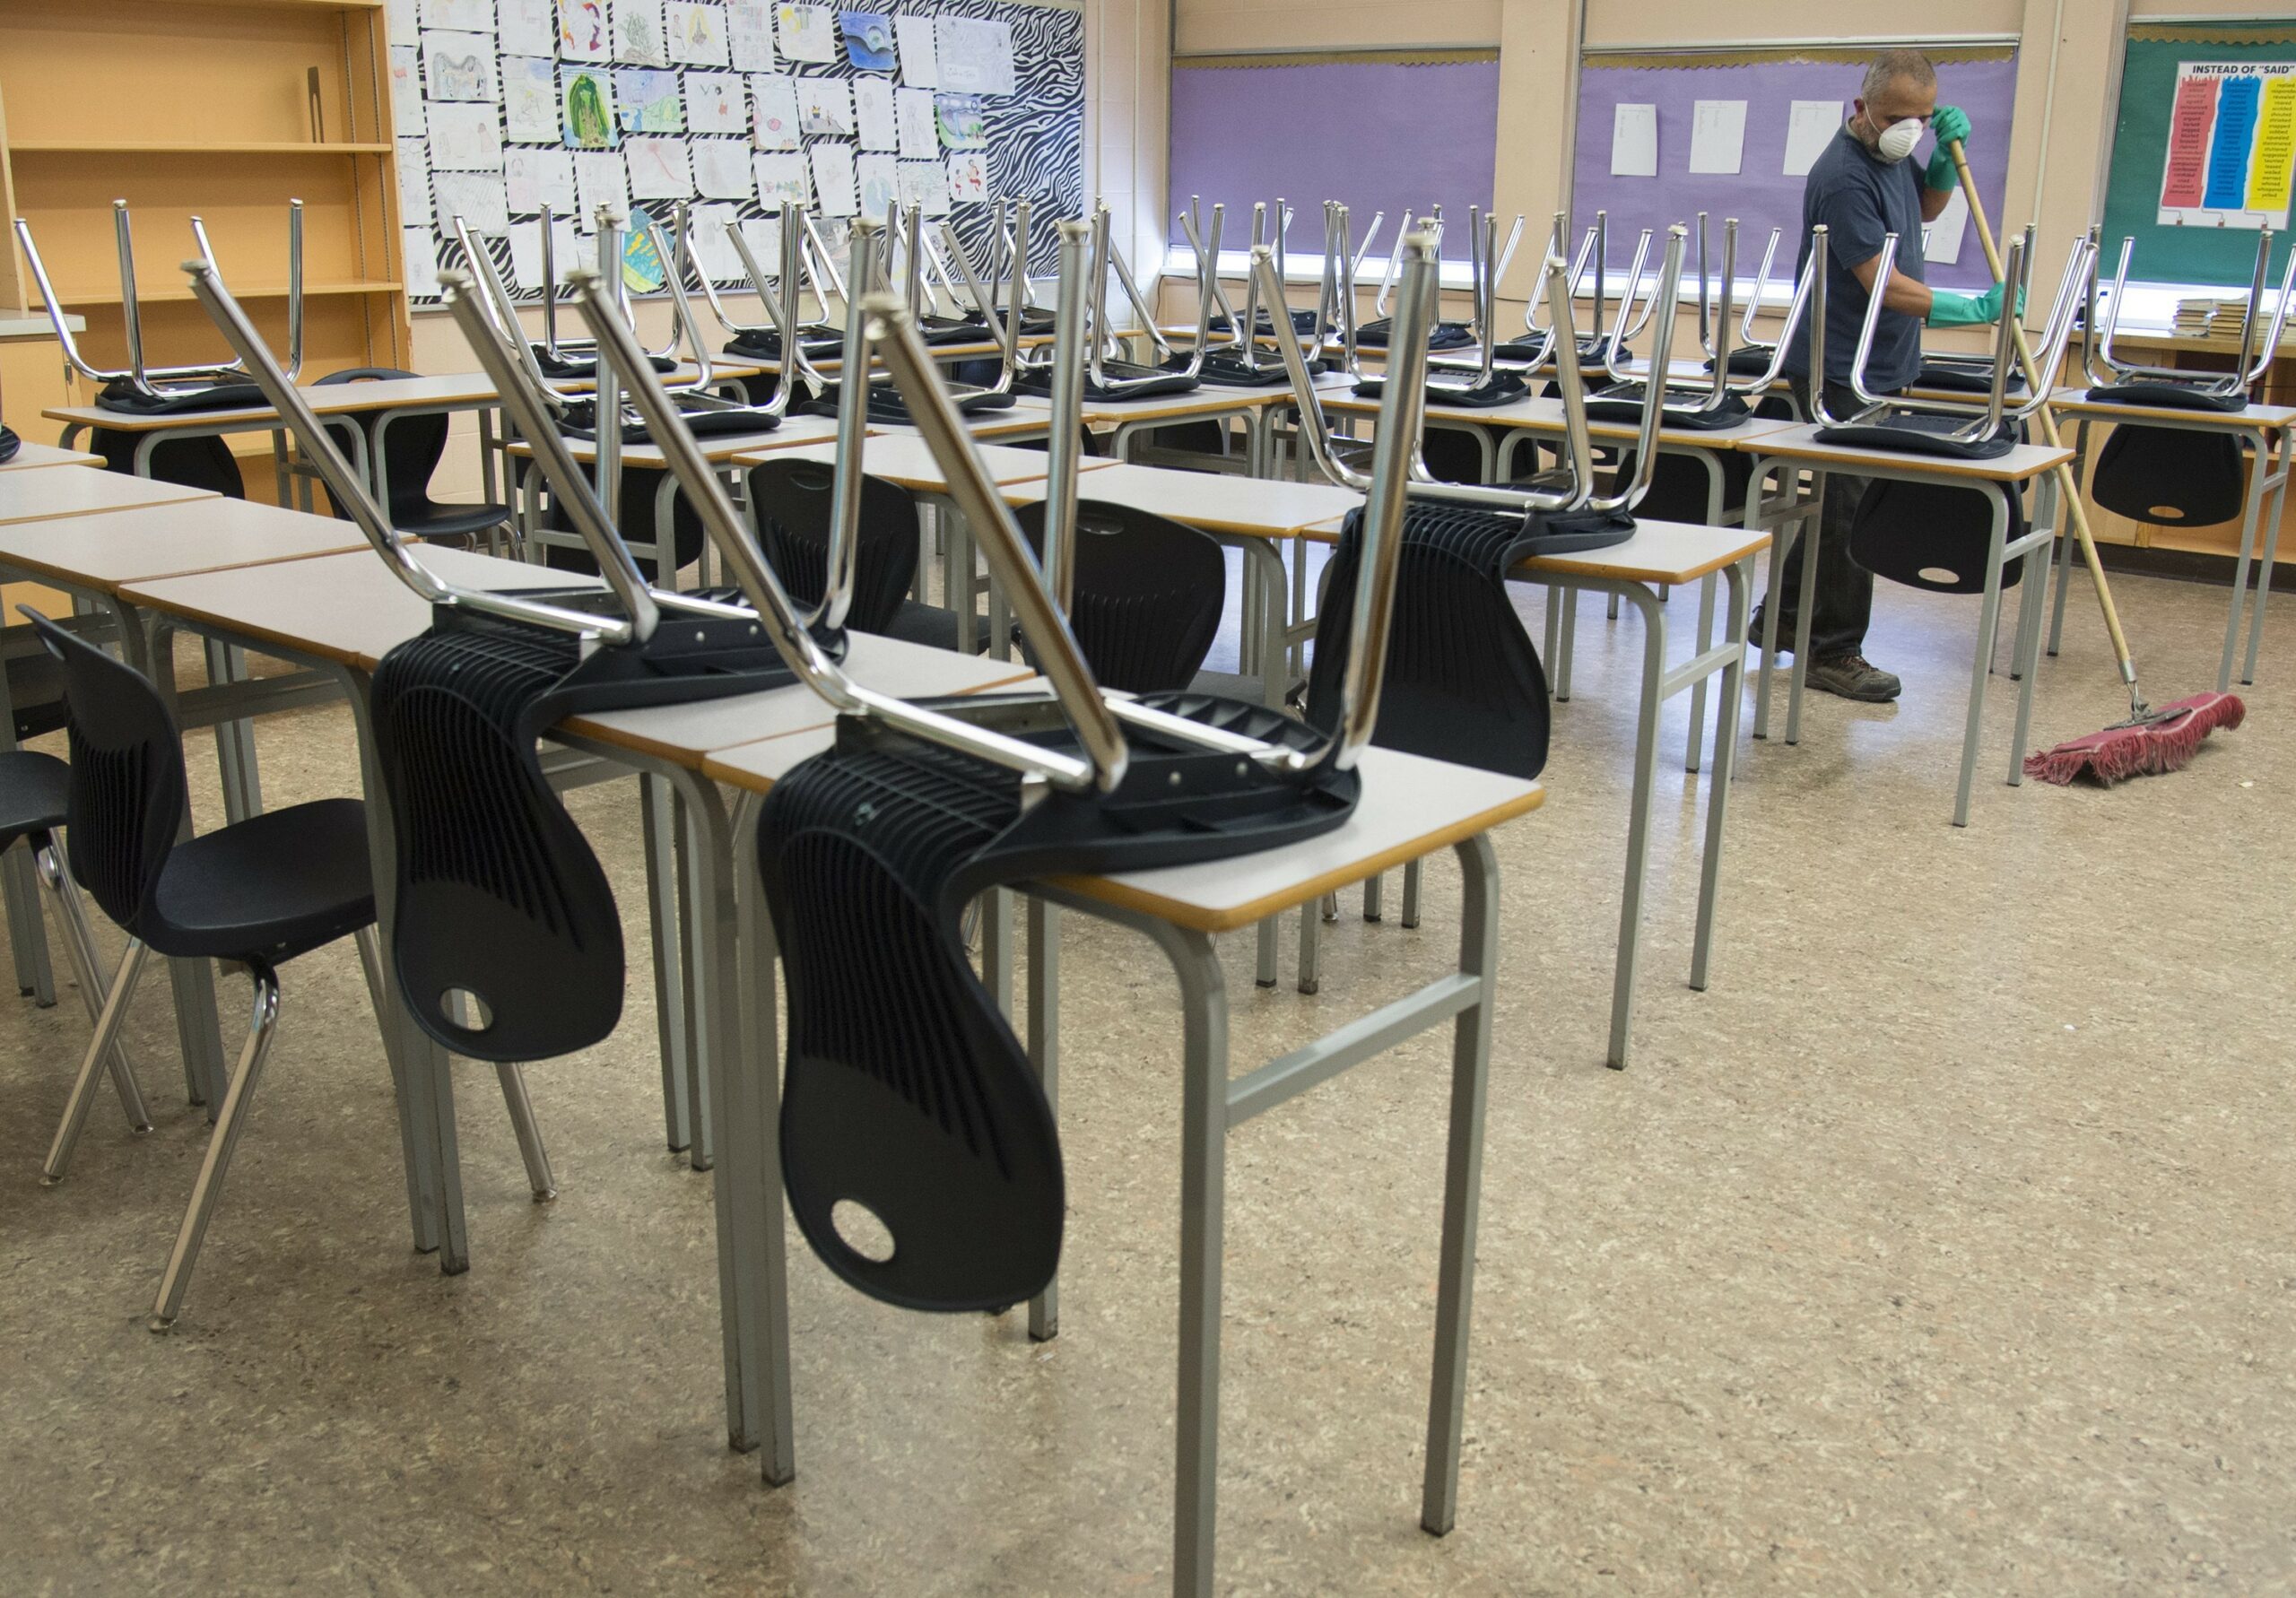 Ontario education workers in legal strike position in 17 days